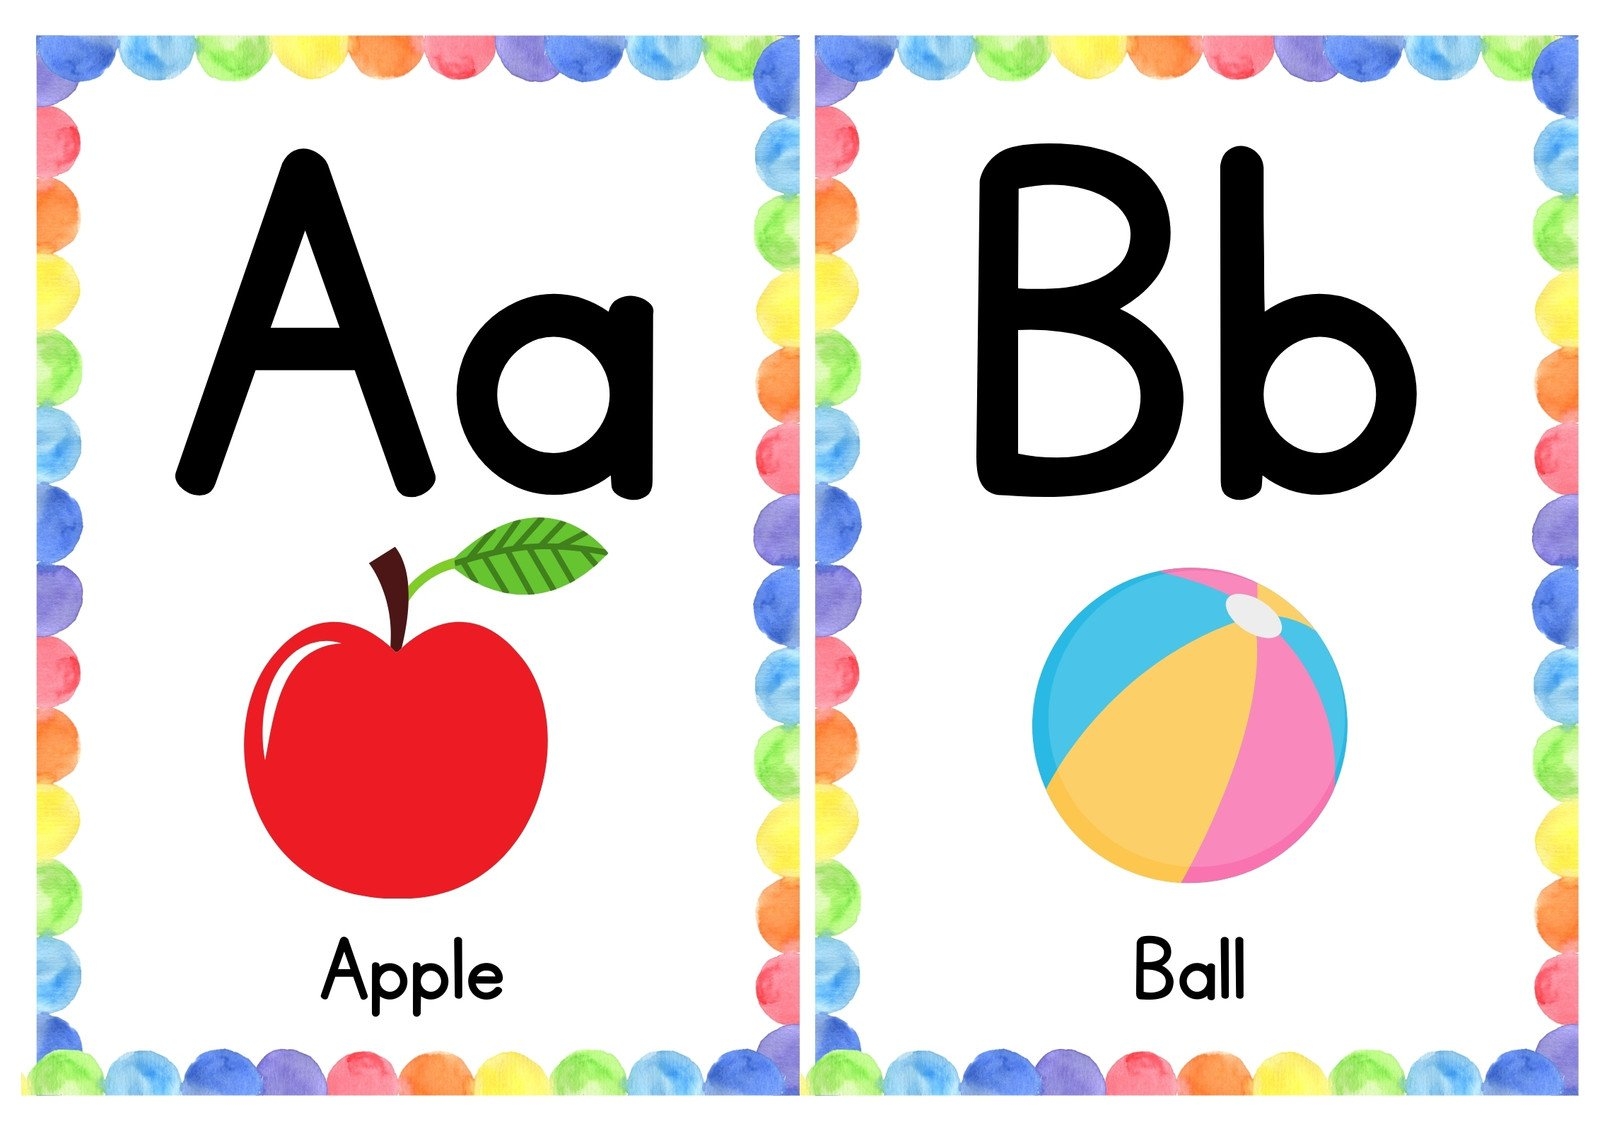 Free Customizable Alphabet Flashcard Templates Canva - Free Printable Abc Flashcards With Pictures